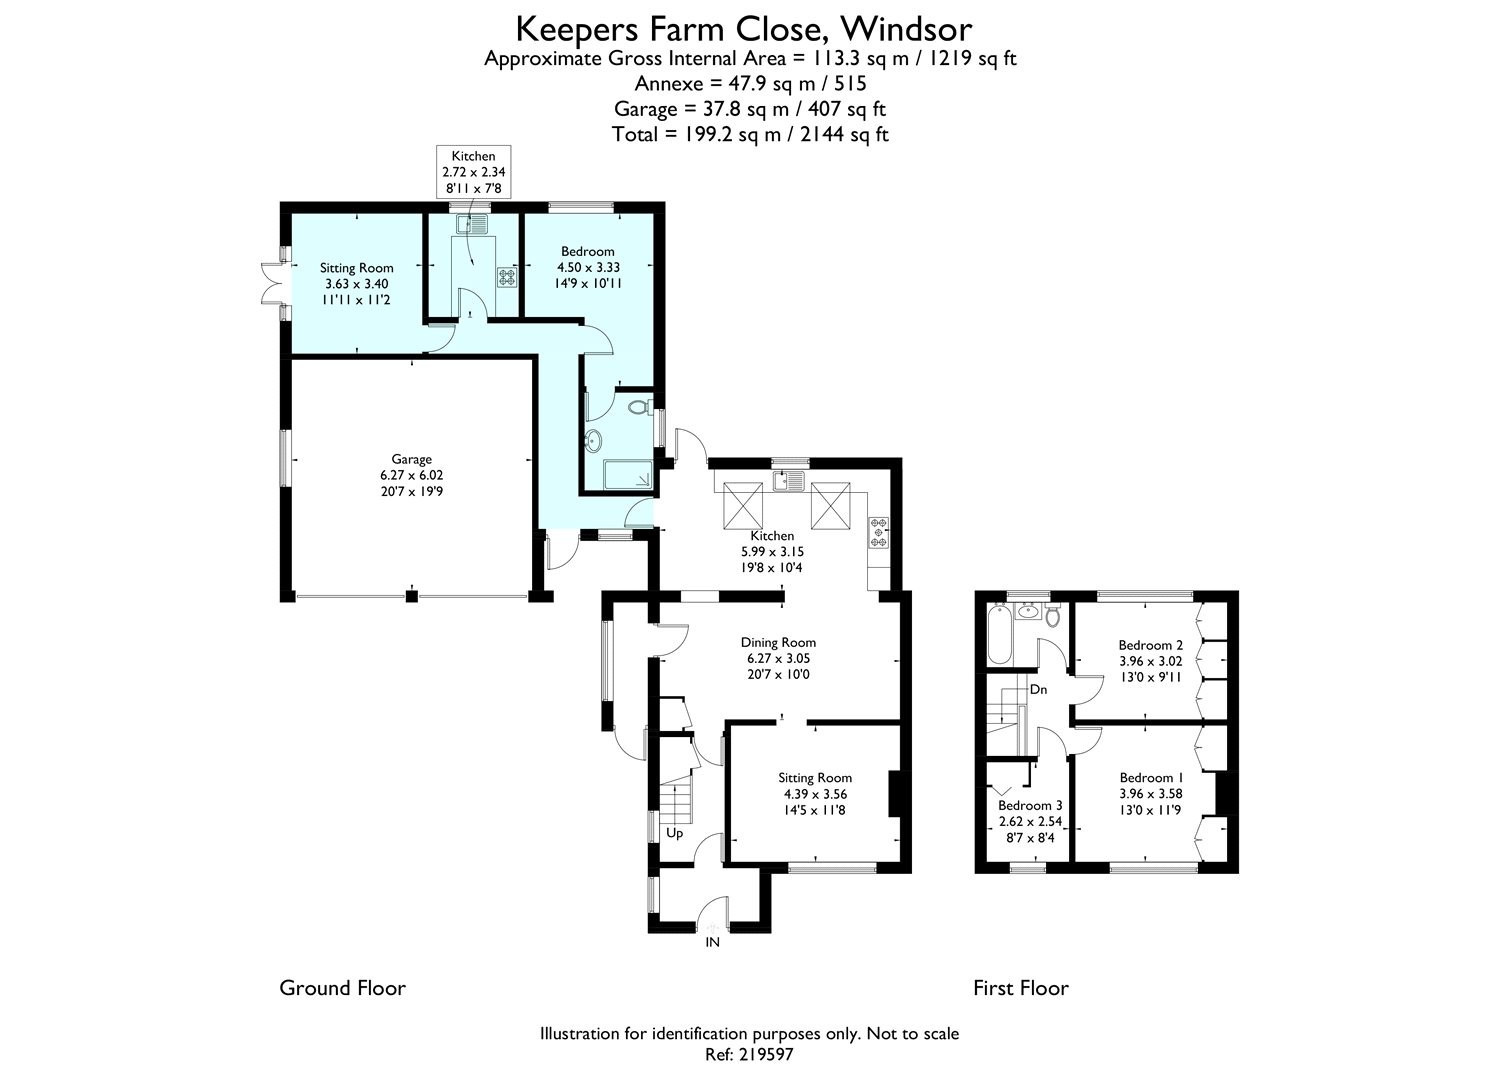 4 Bedrooms Semi-detached house for sale in Keepers Farm Close, Windsor, Berkshire SL4